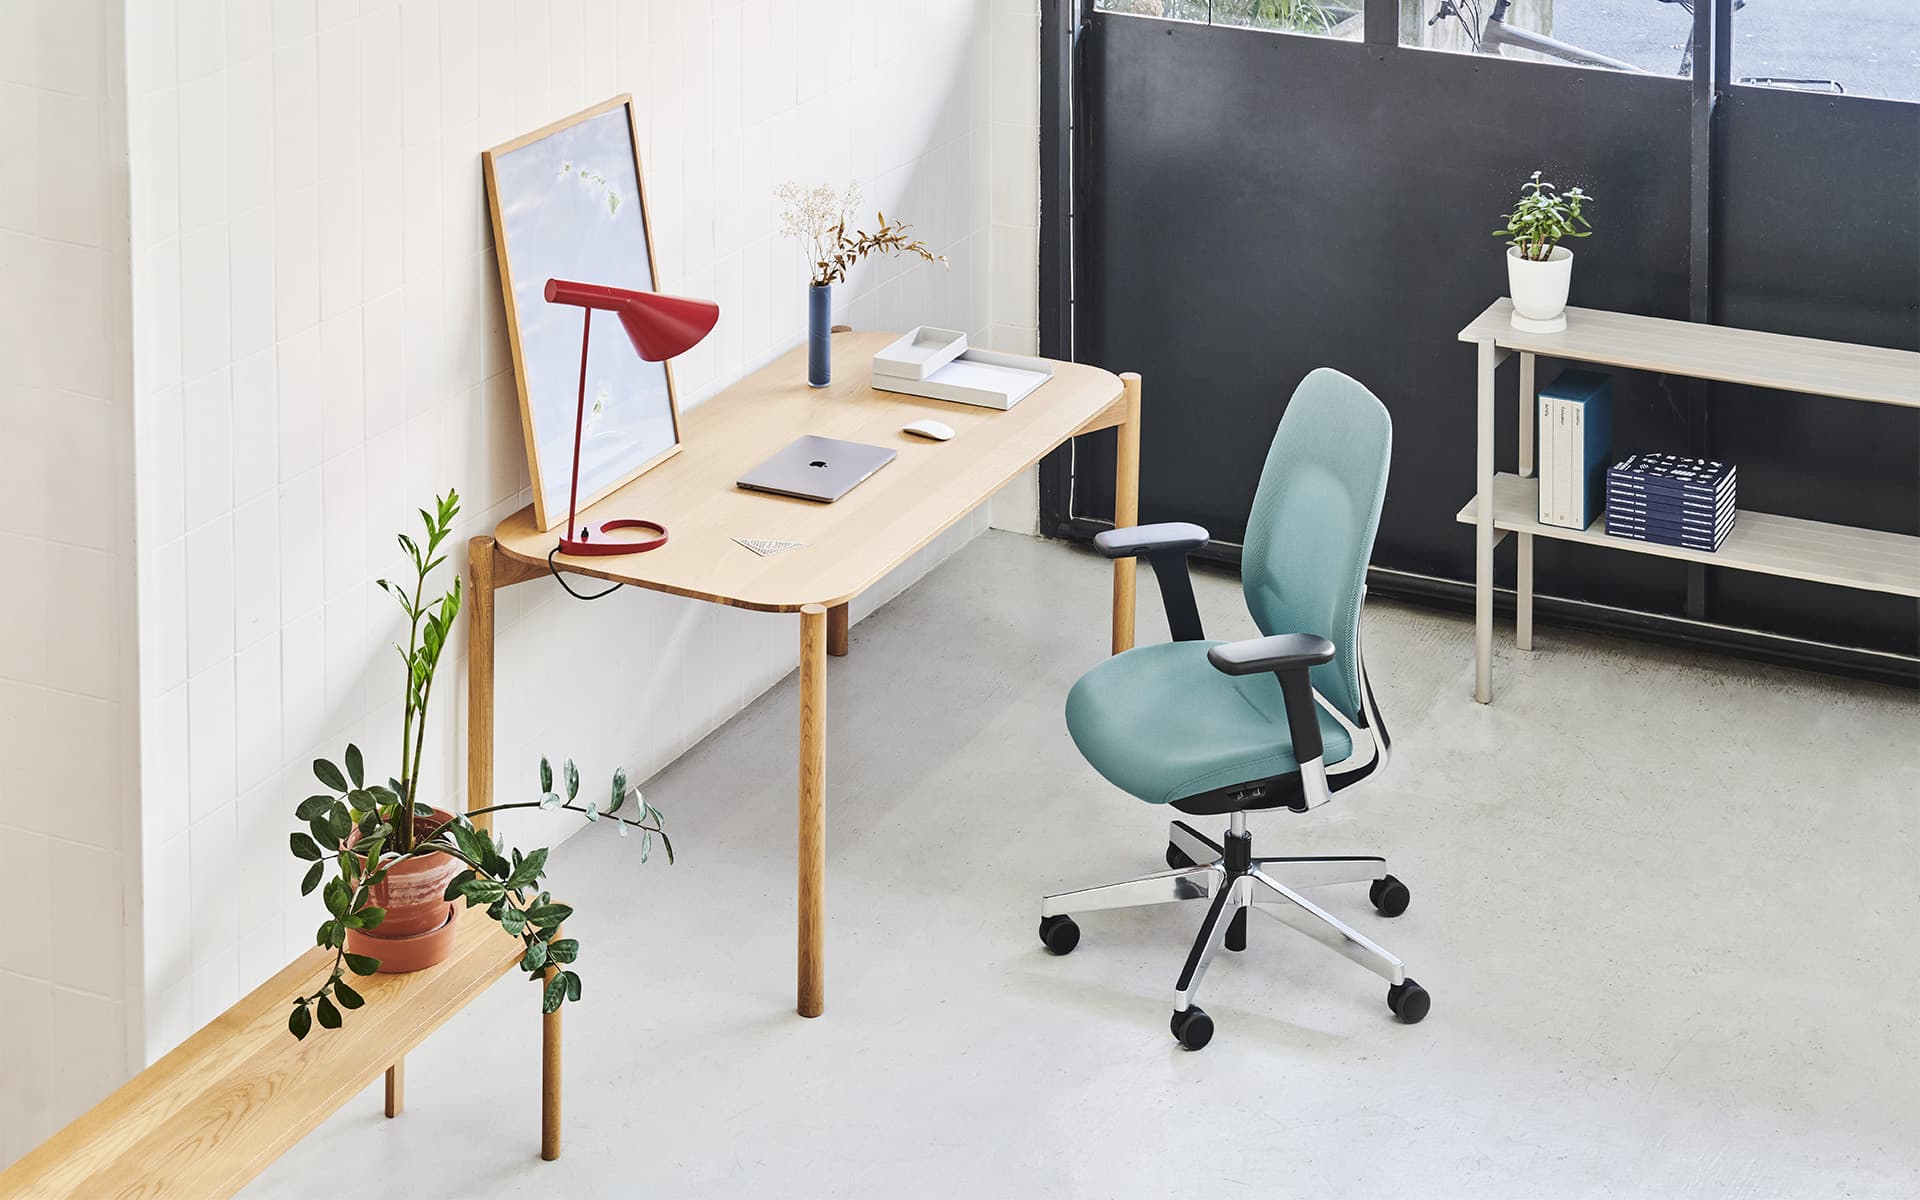 Flokk Giroflex 40 office chair by ITO Design with turquoise upholstery at a homely workstation – front/lateral view